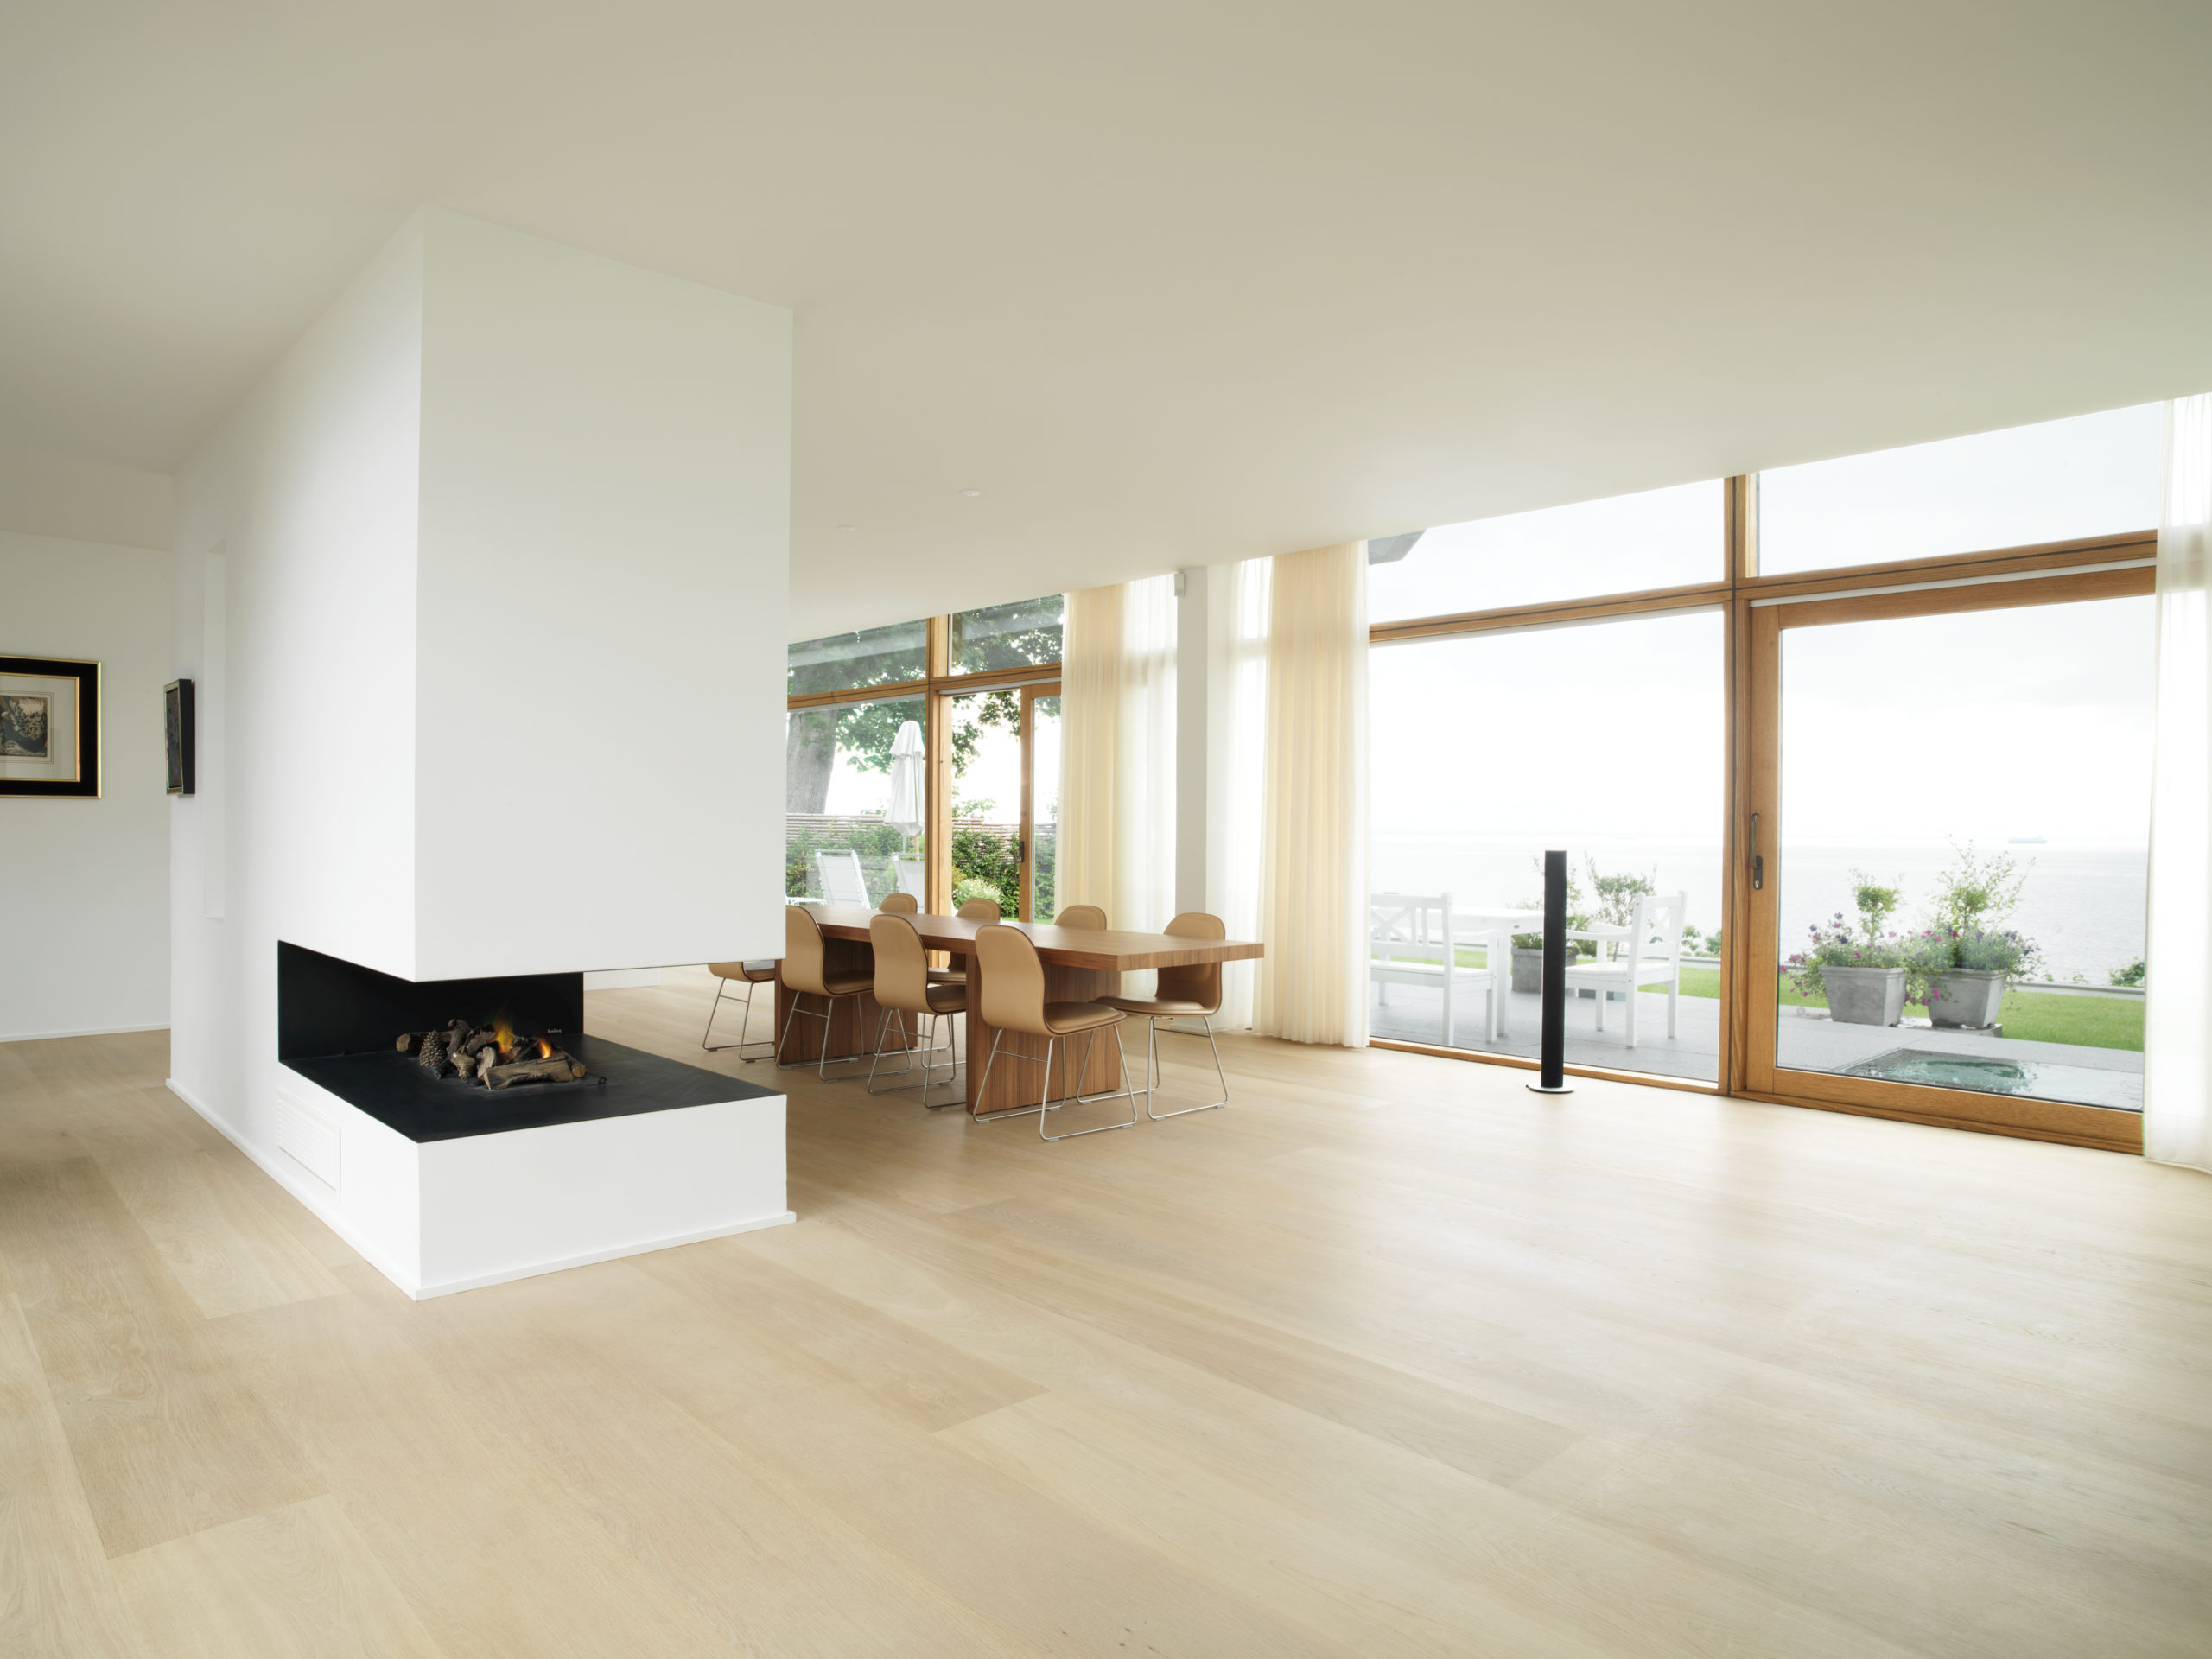 The Beauty of Wood: Why Architects Love Dinesen